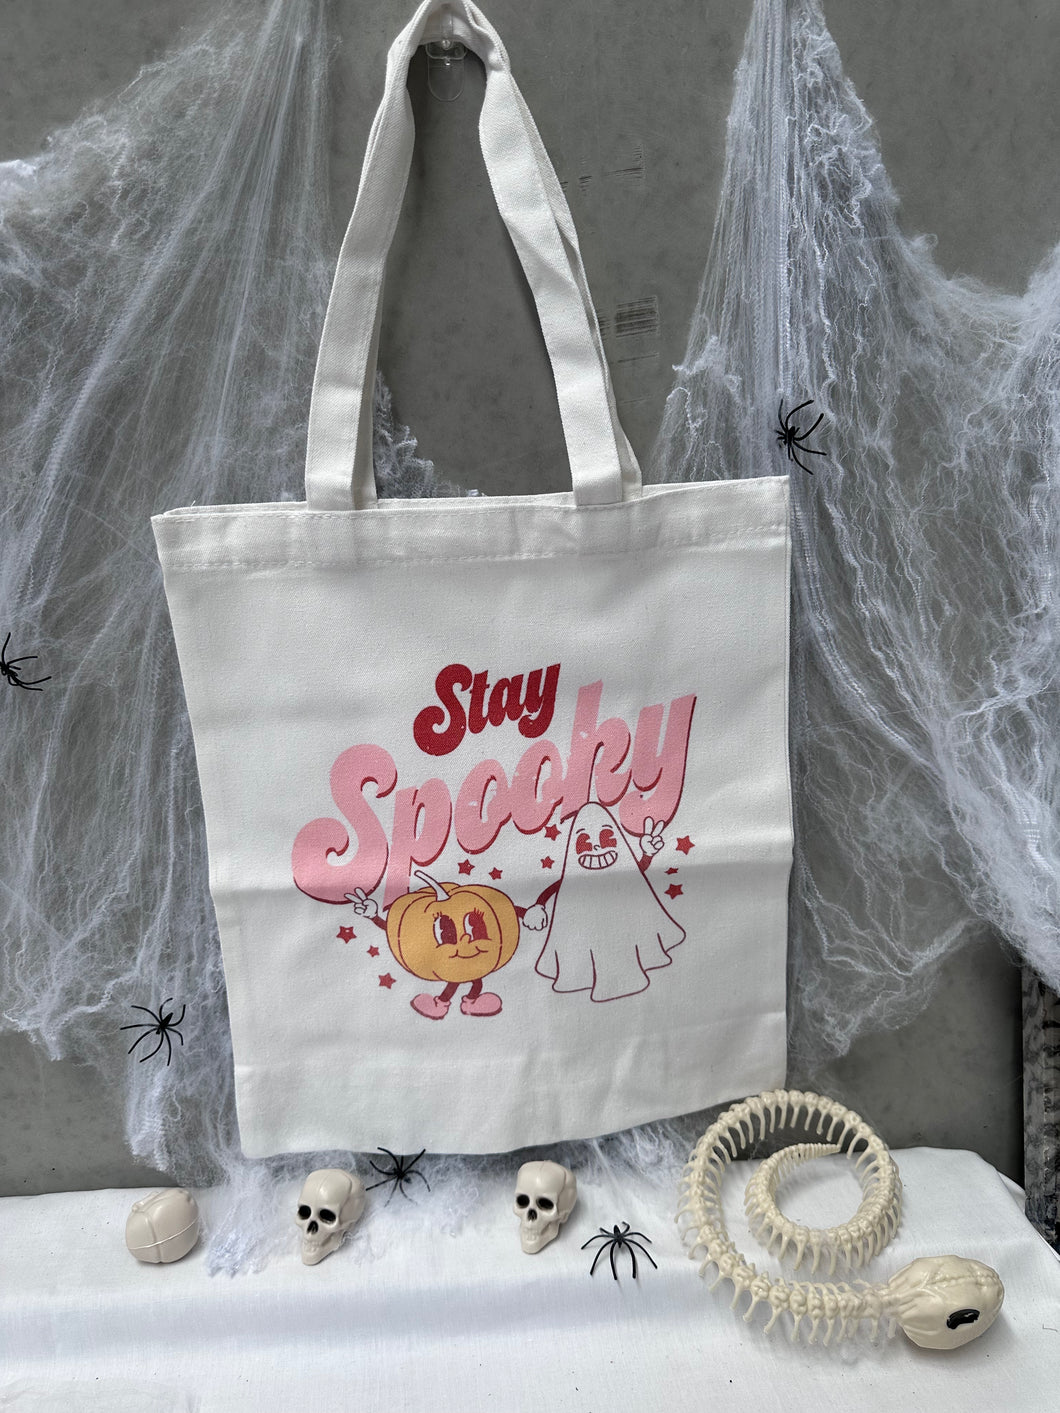 Stay Spooky Calico Bag